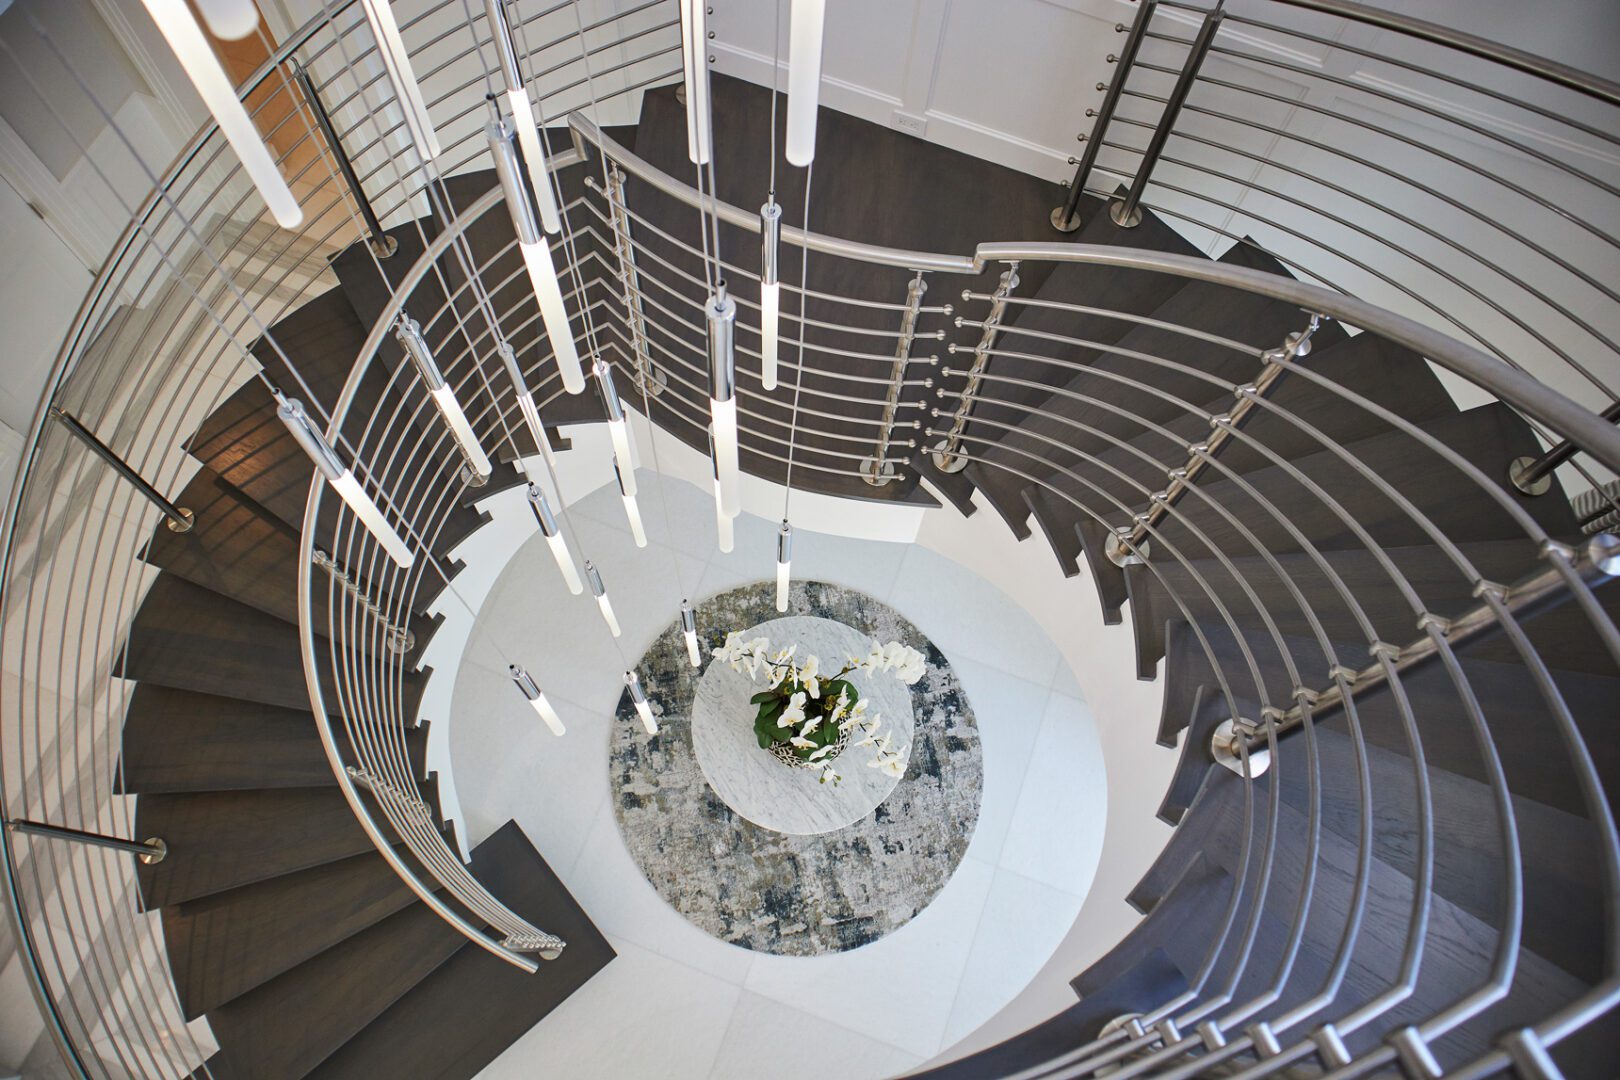 A spiral staircase with metal railing and white walls.